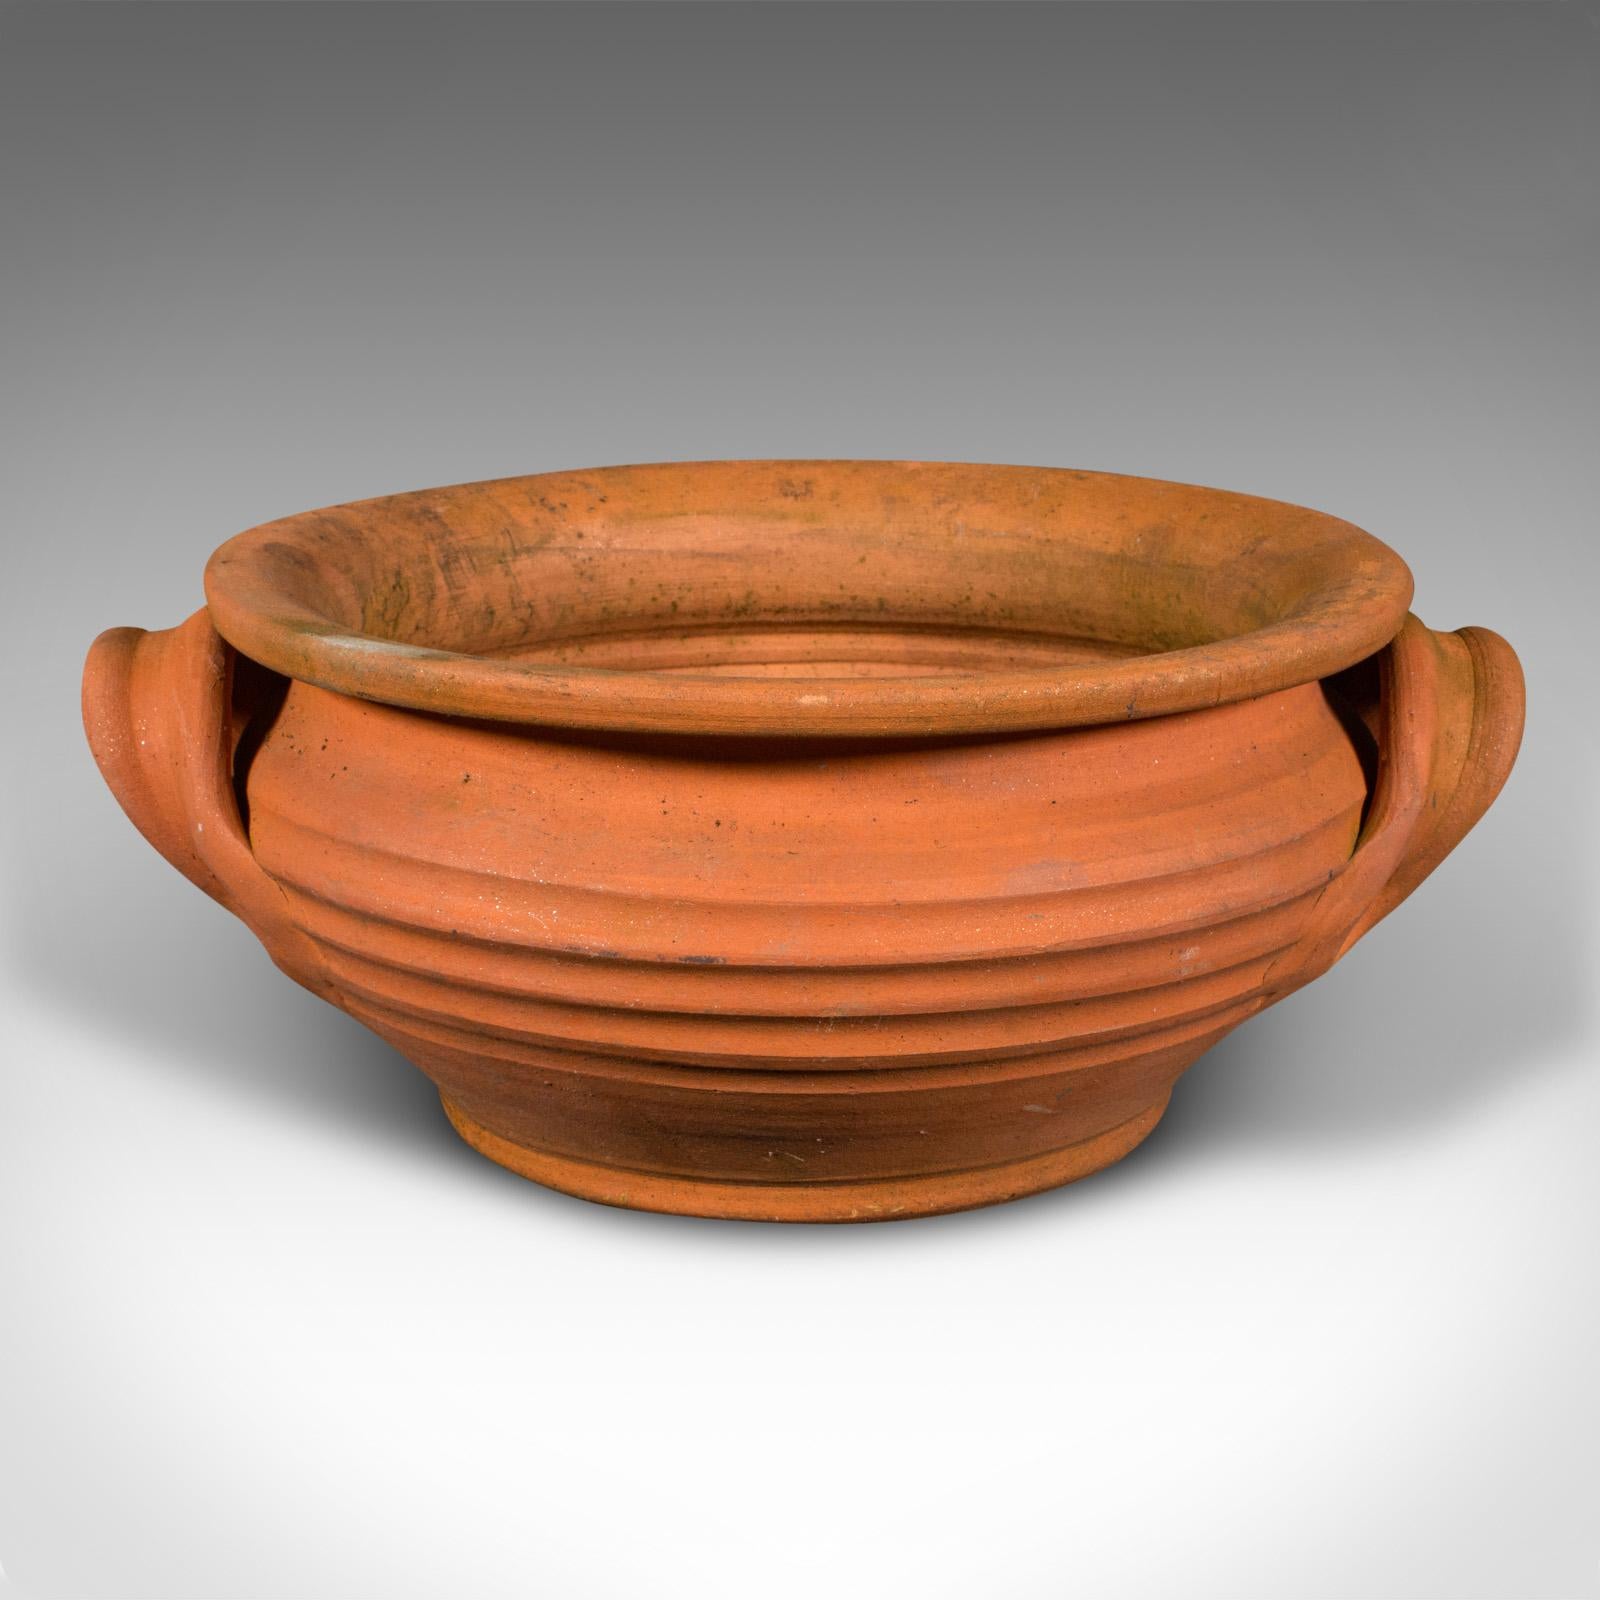 This is a vintage circular jardiniere. An Italian, terracotta garden or patio planter pot, dating to the mid 20th century, circa 1960.

Fascinating cylindrical form with great colour
Displays a desirable aged patina and in good order
Terracotta